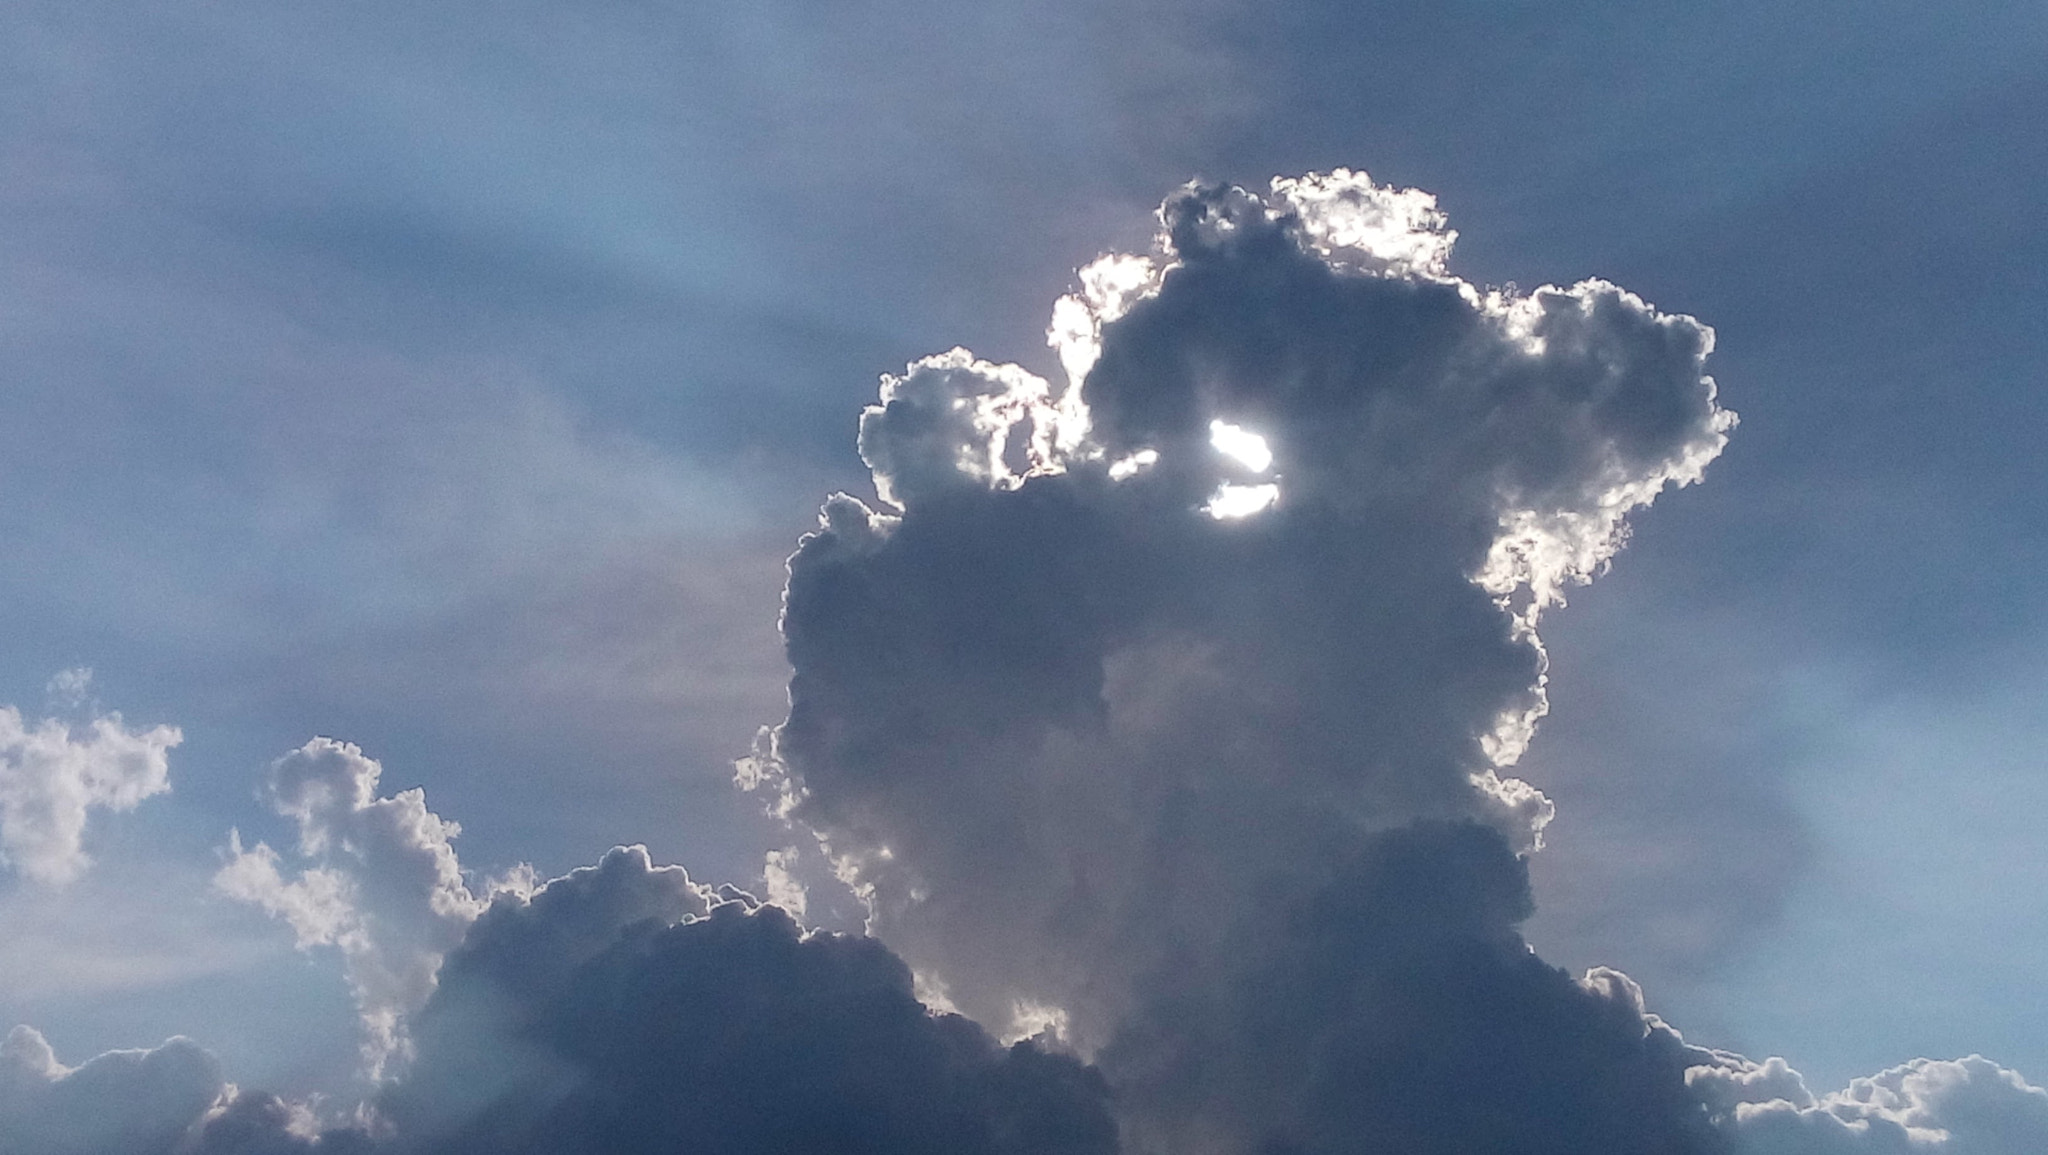 LG LBello sample photo. Beautiful cloud (cell phone photo-unretouched) photography